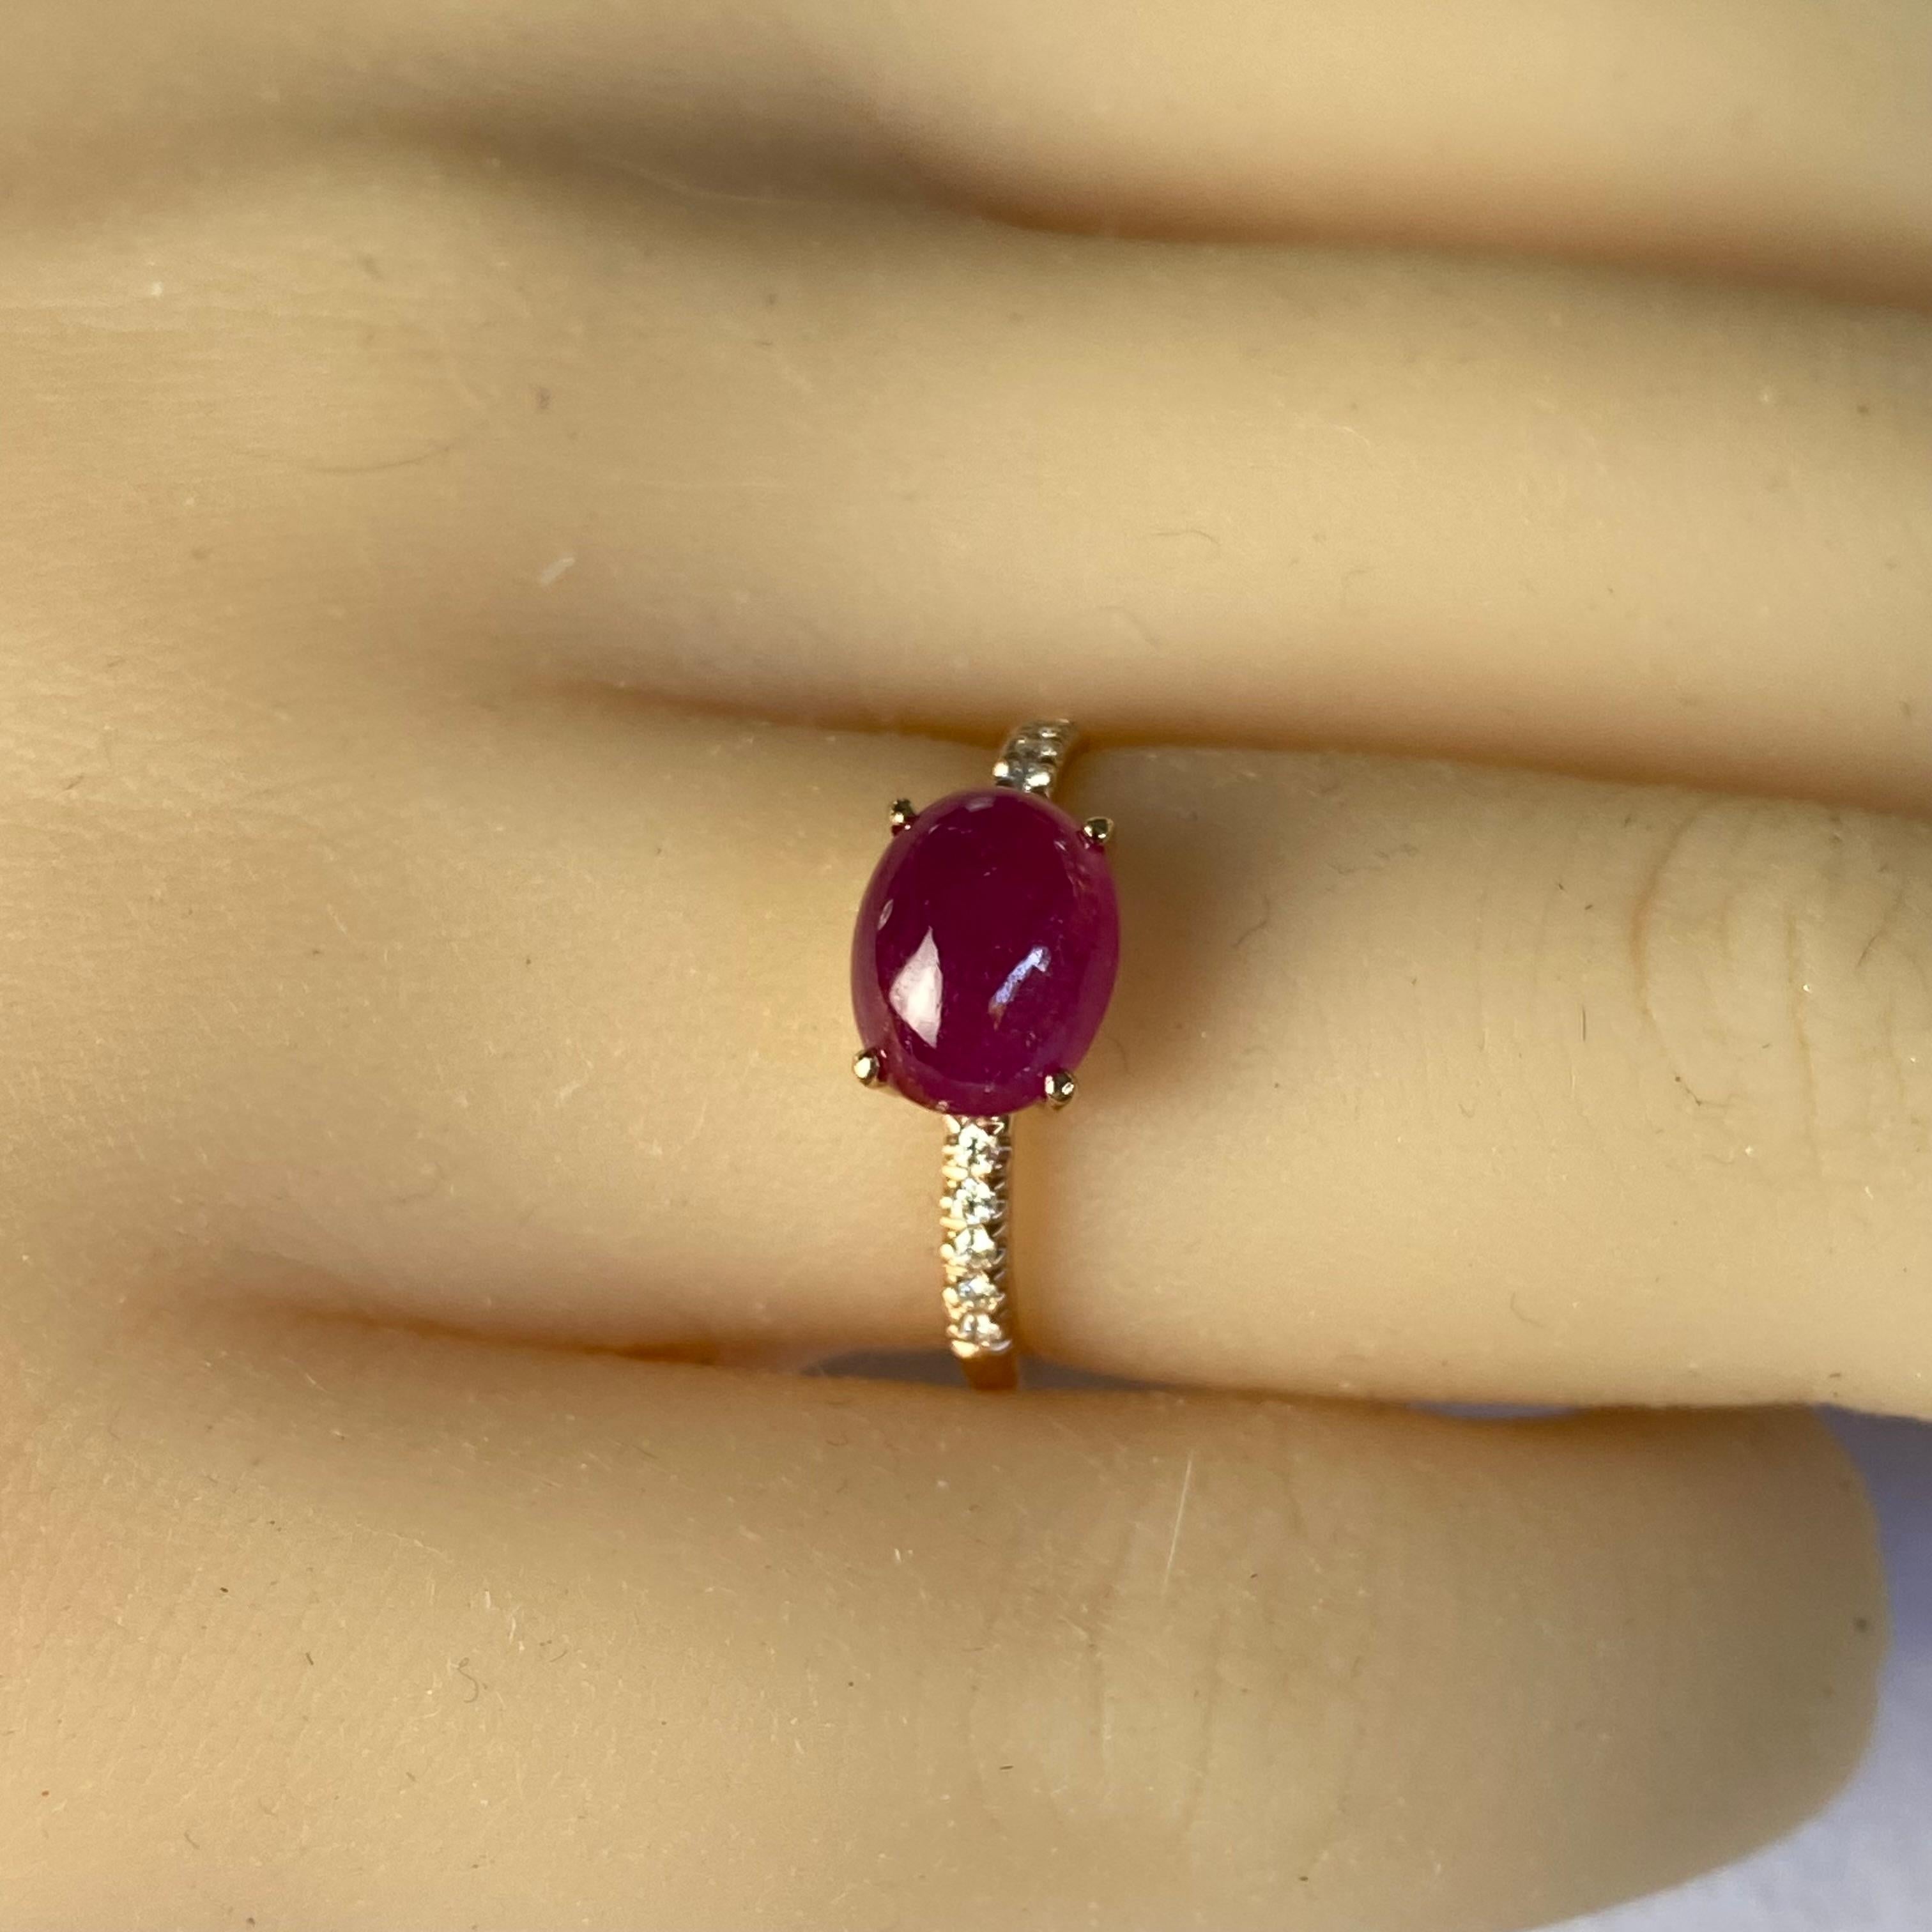 Cabochon Burma Ruby 2.80 Carat Diamond 0.25 Carat Rose Gold Cocktail Ring For Sale 3